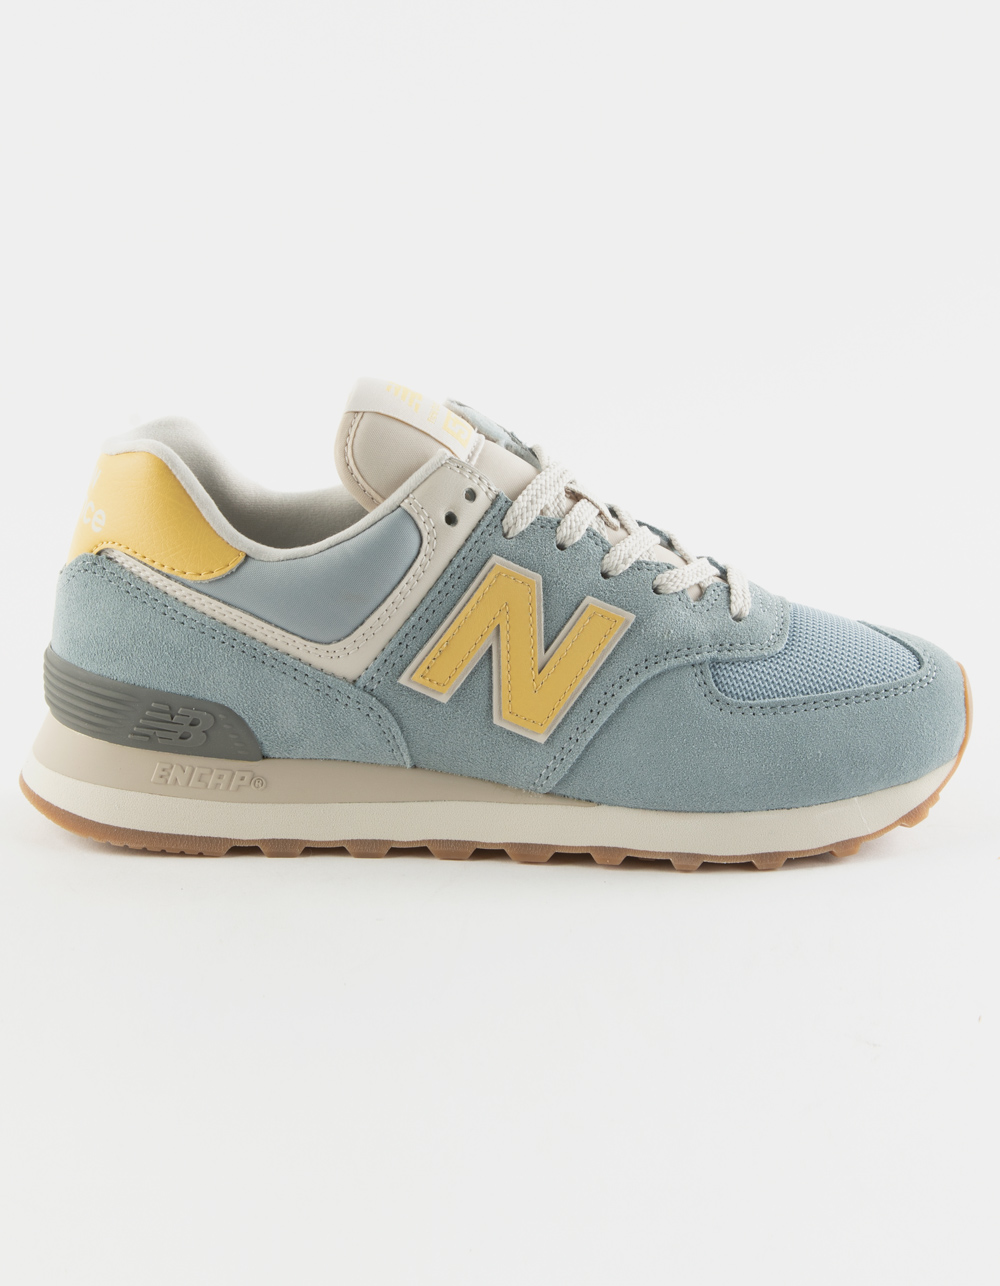 NEW BALANCE 574 Womens Shoes - BABY BLUE | Tillys